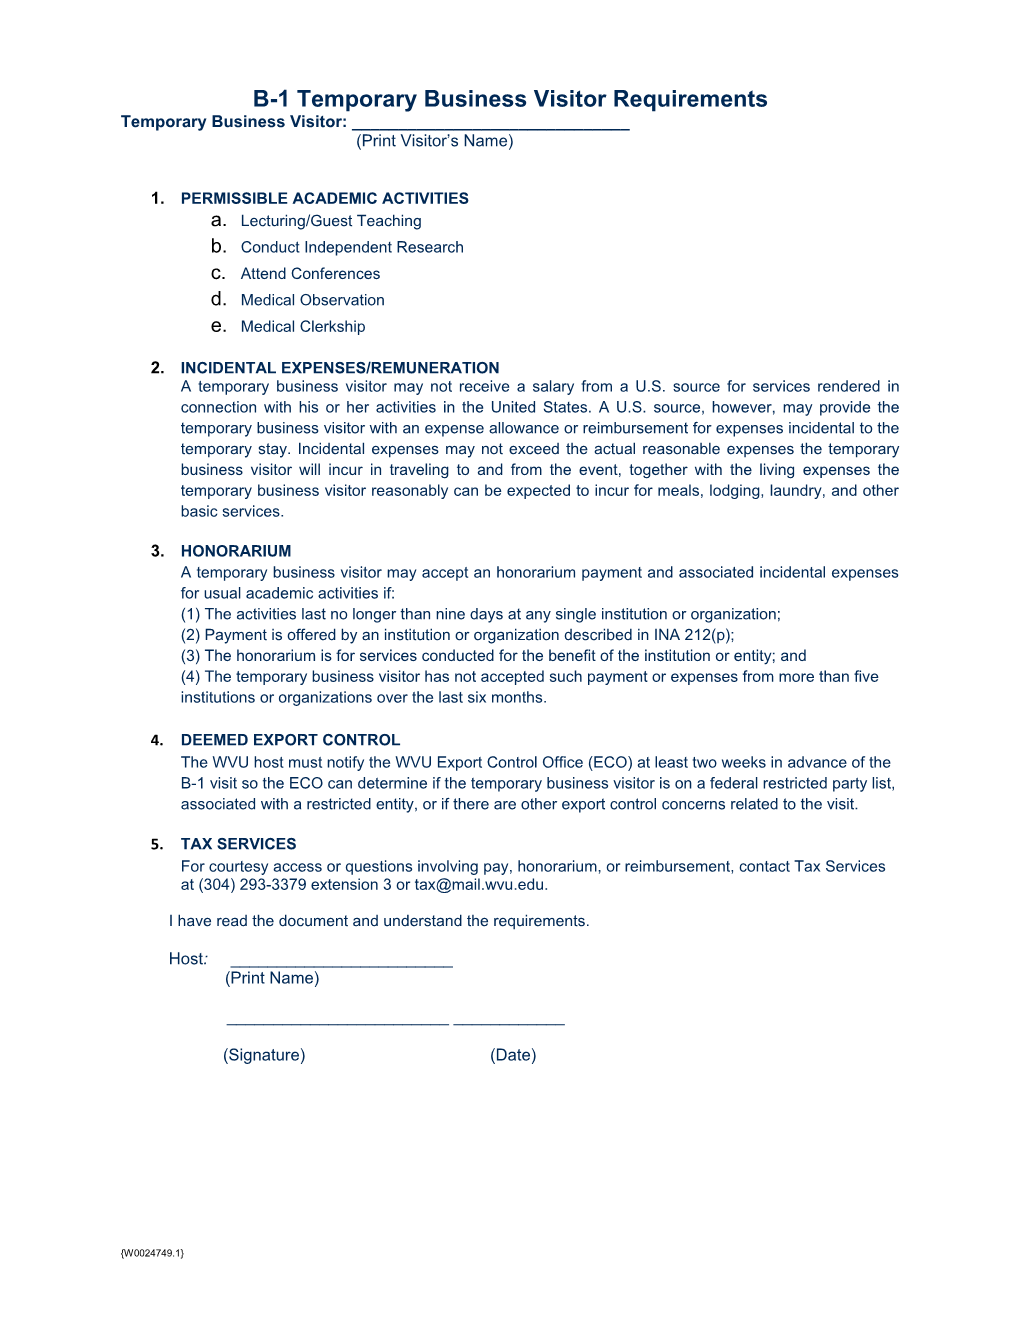 B-1 Temporary Business Visitor Requirements 5/14/15 (W0024749;1)